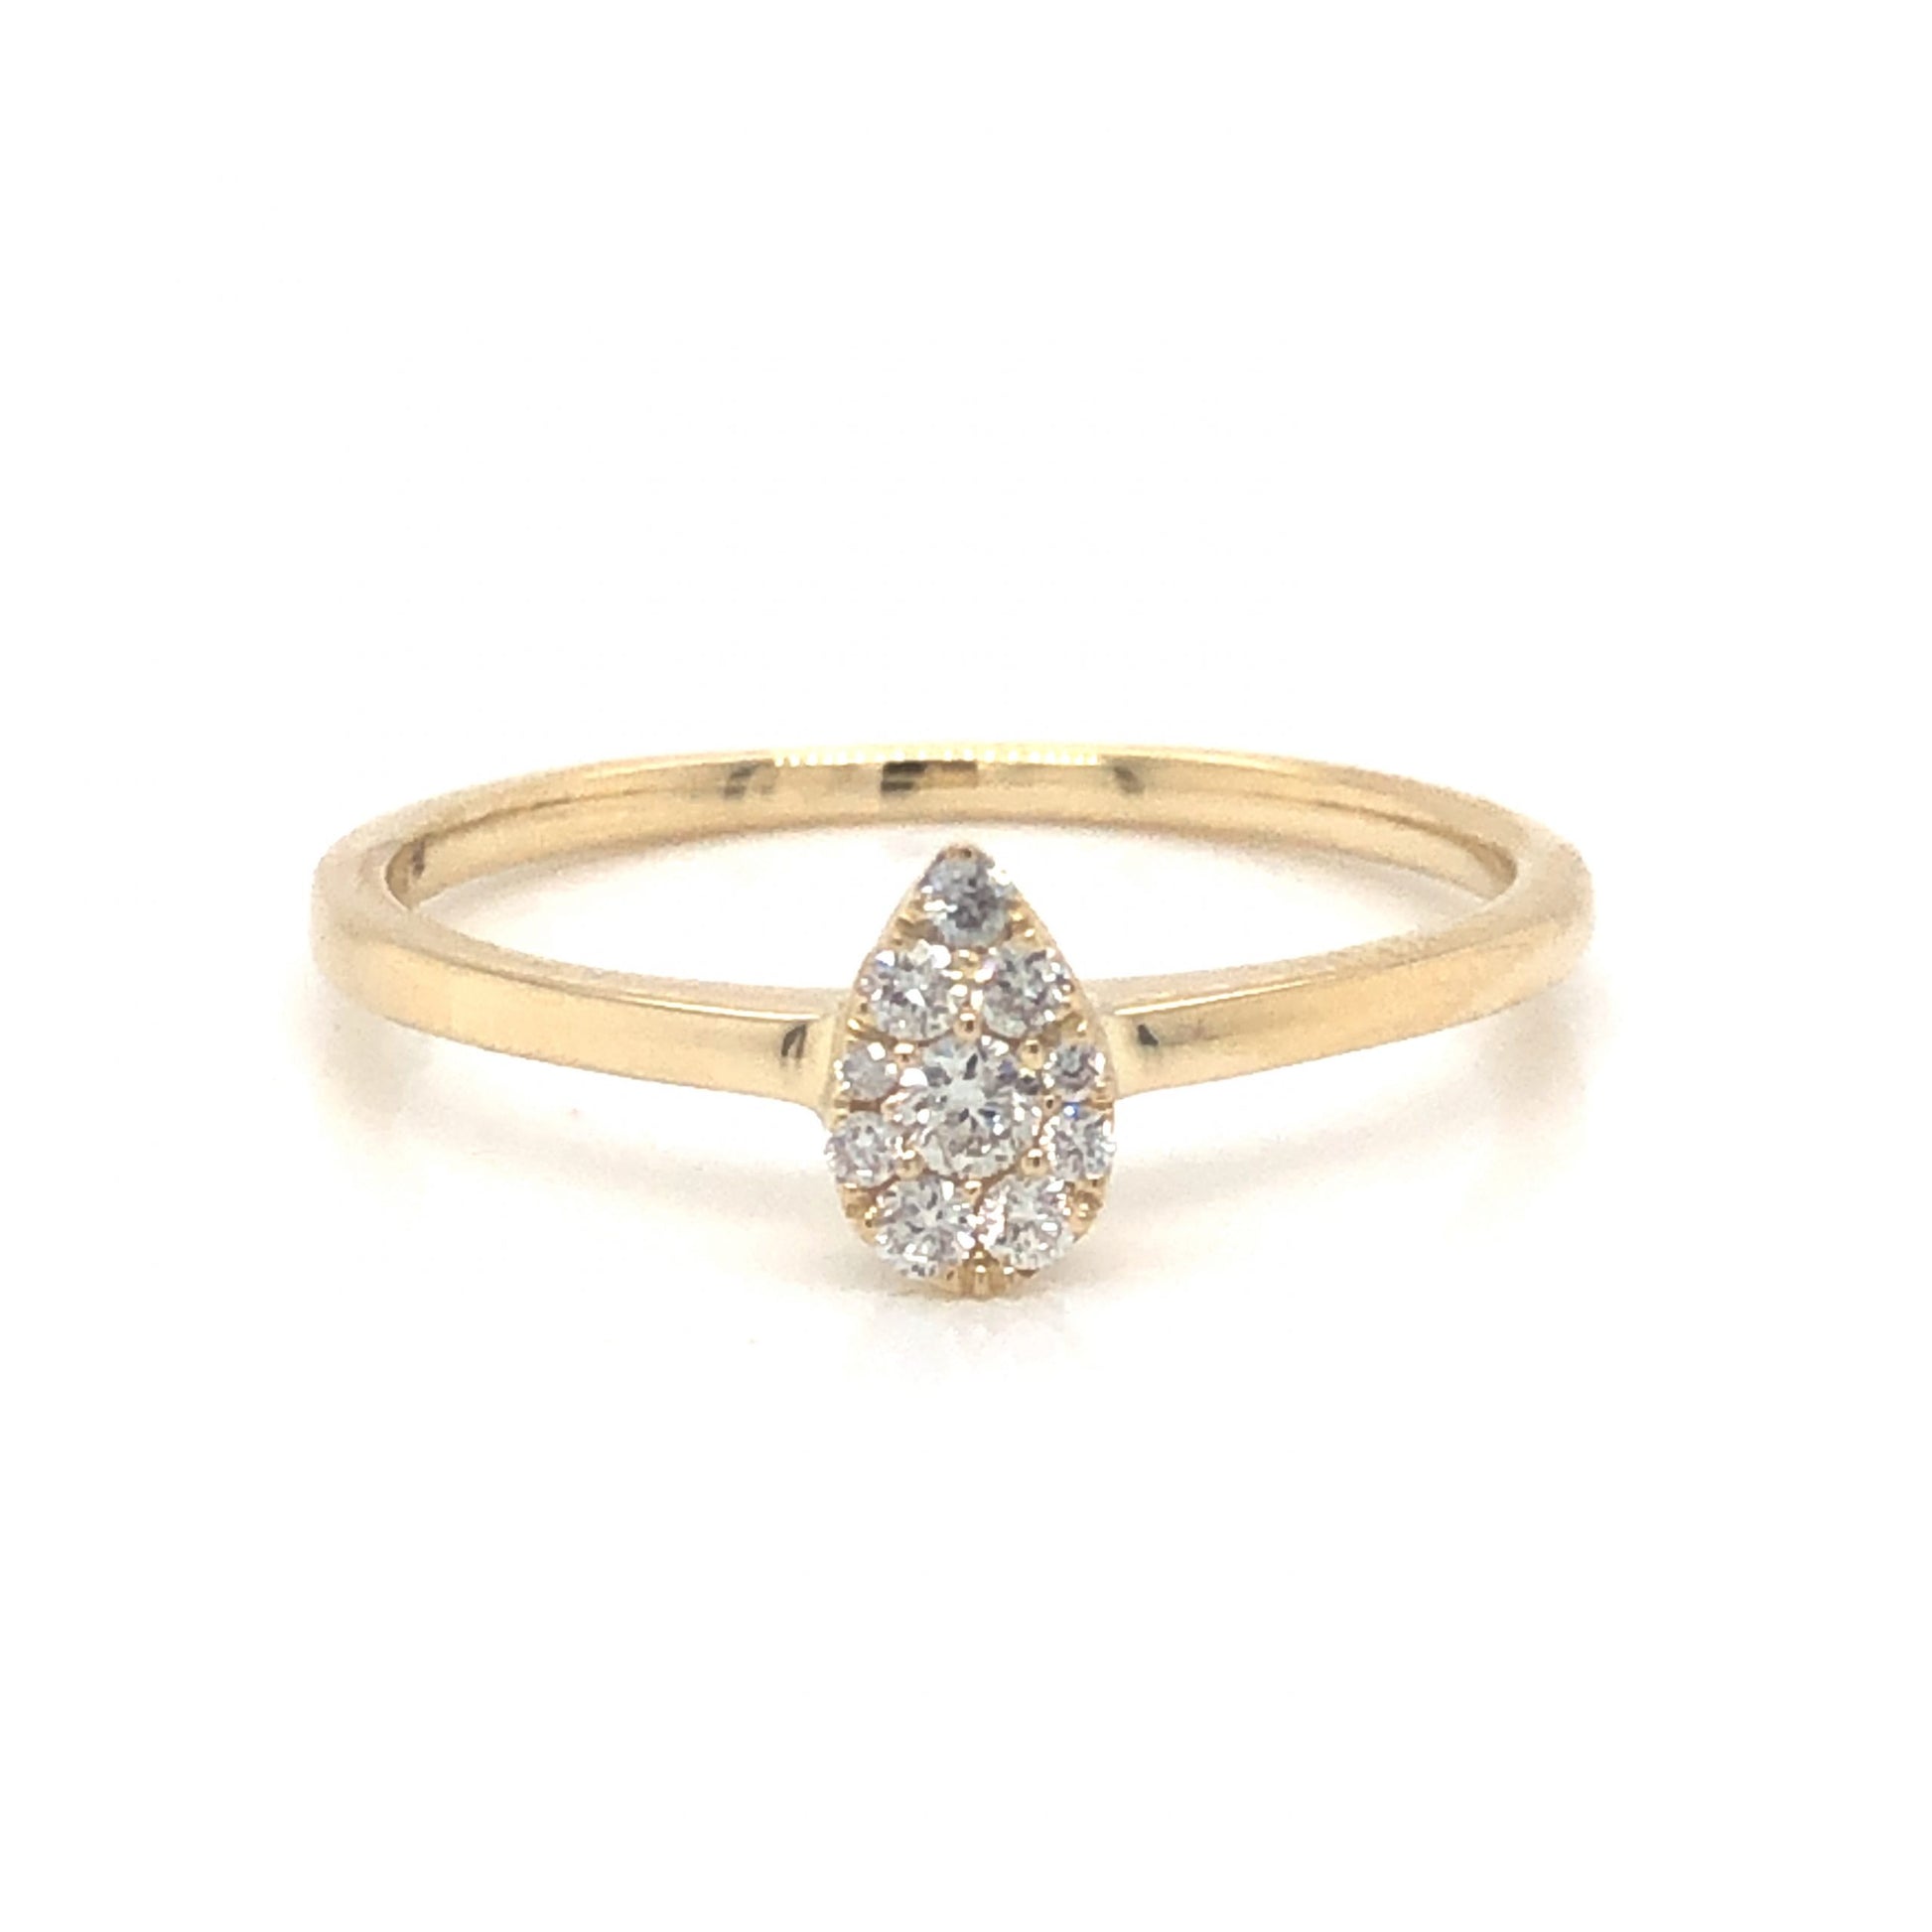 .11 Pave Pear Diamond Stacking Ring in 14k Yellow Gold